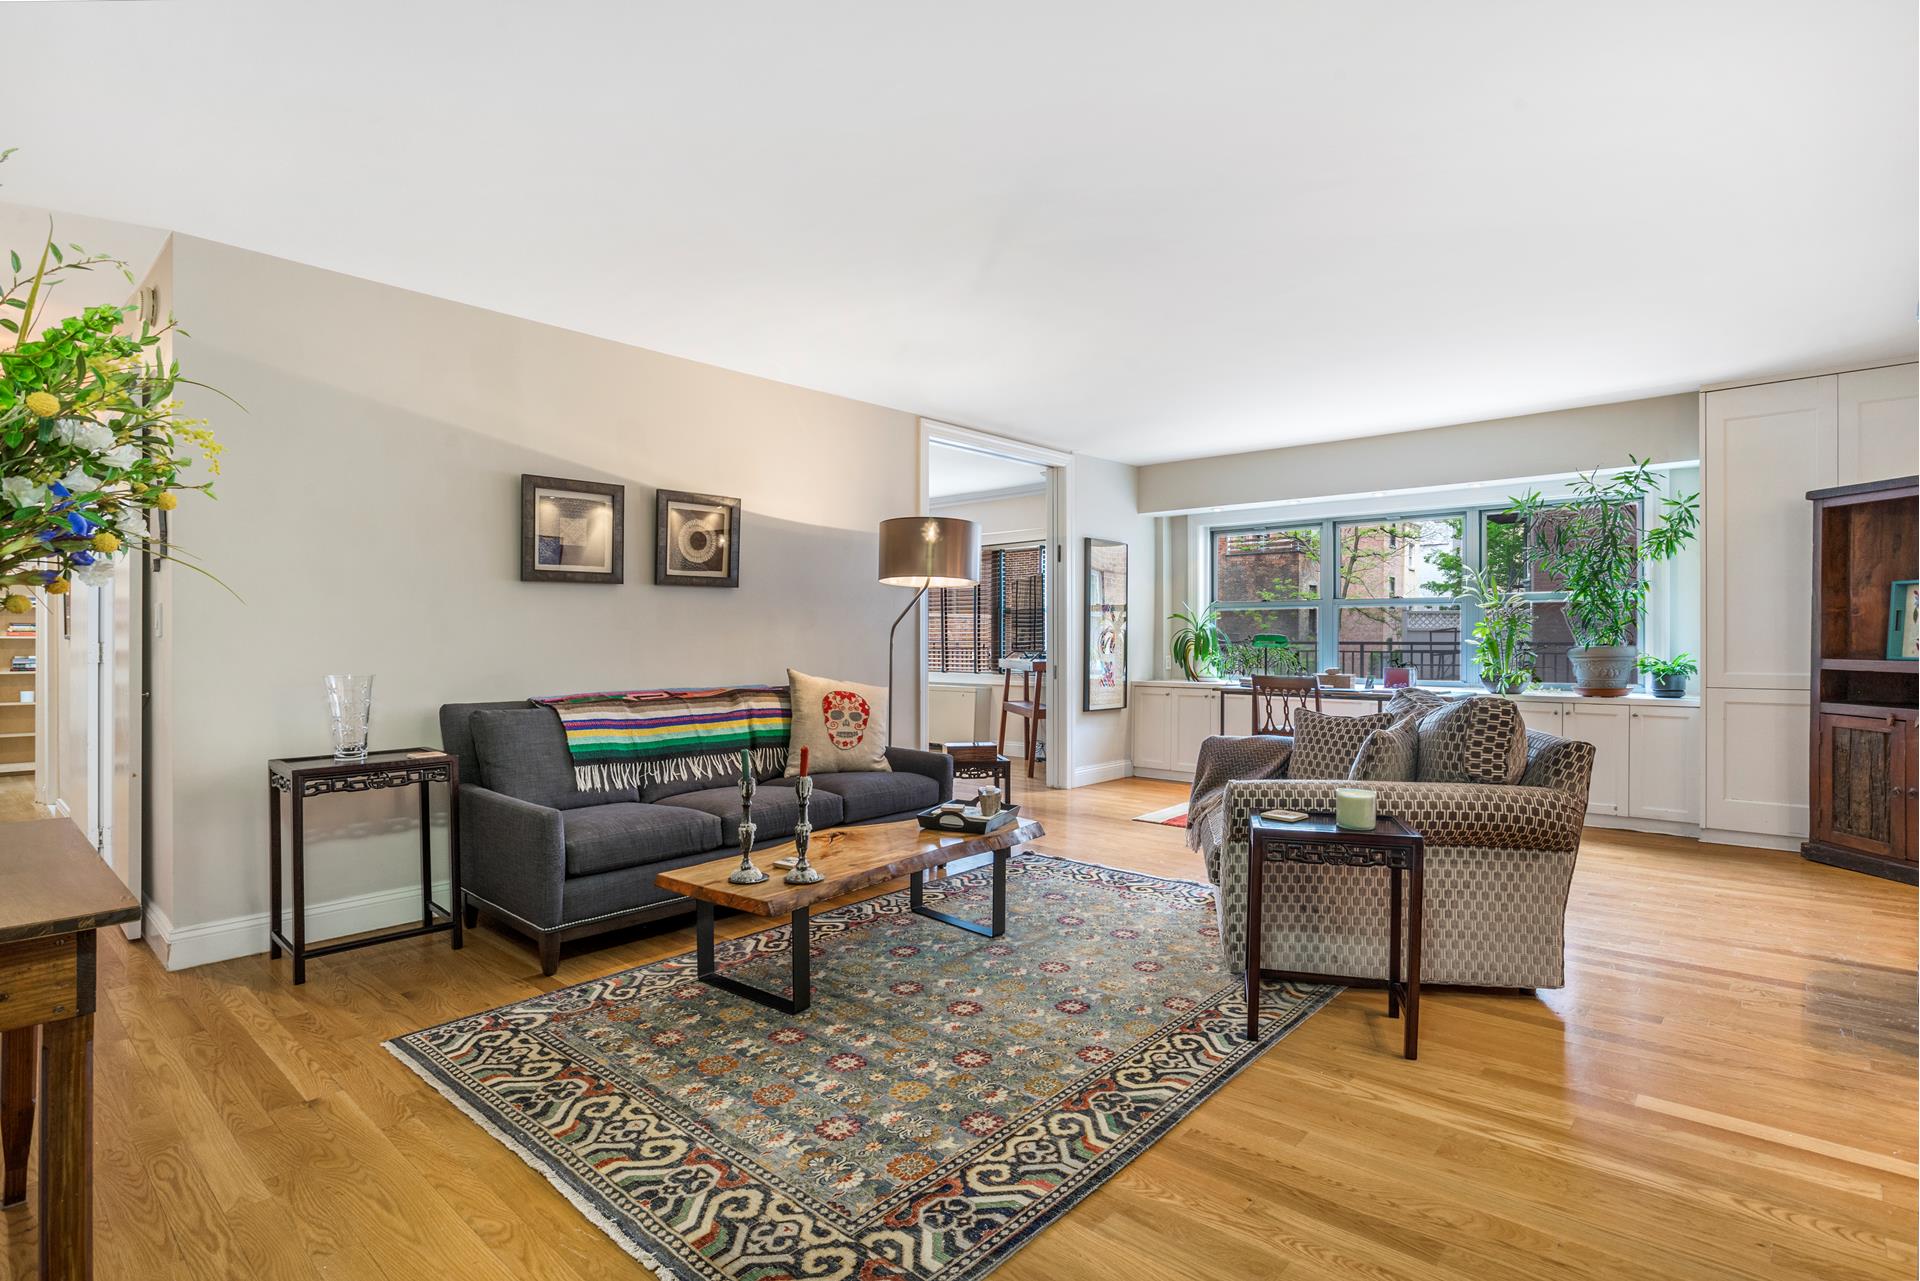 27 East 65th Street 3A, Lenox Hill, Upper East Side, NYC - 2 Bedrooms  
1.5 Bathrooms  
5 Rooms - 